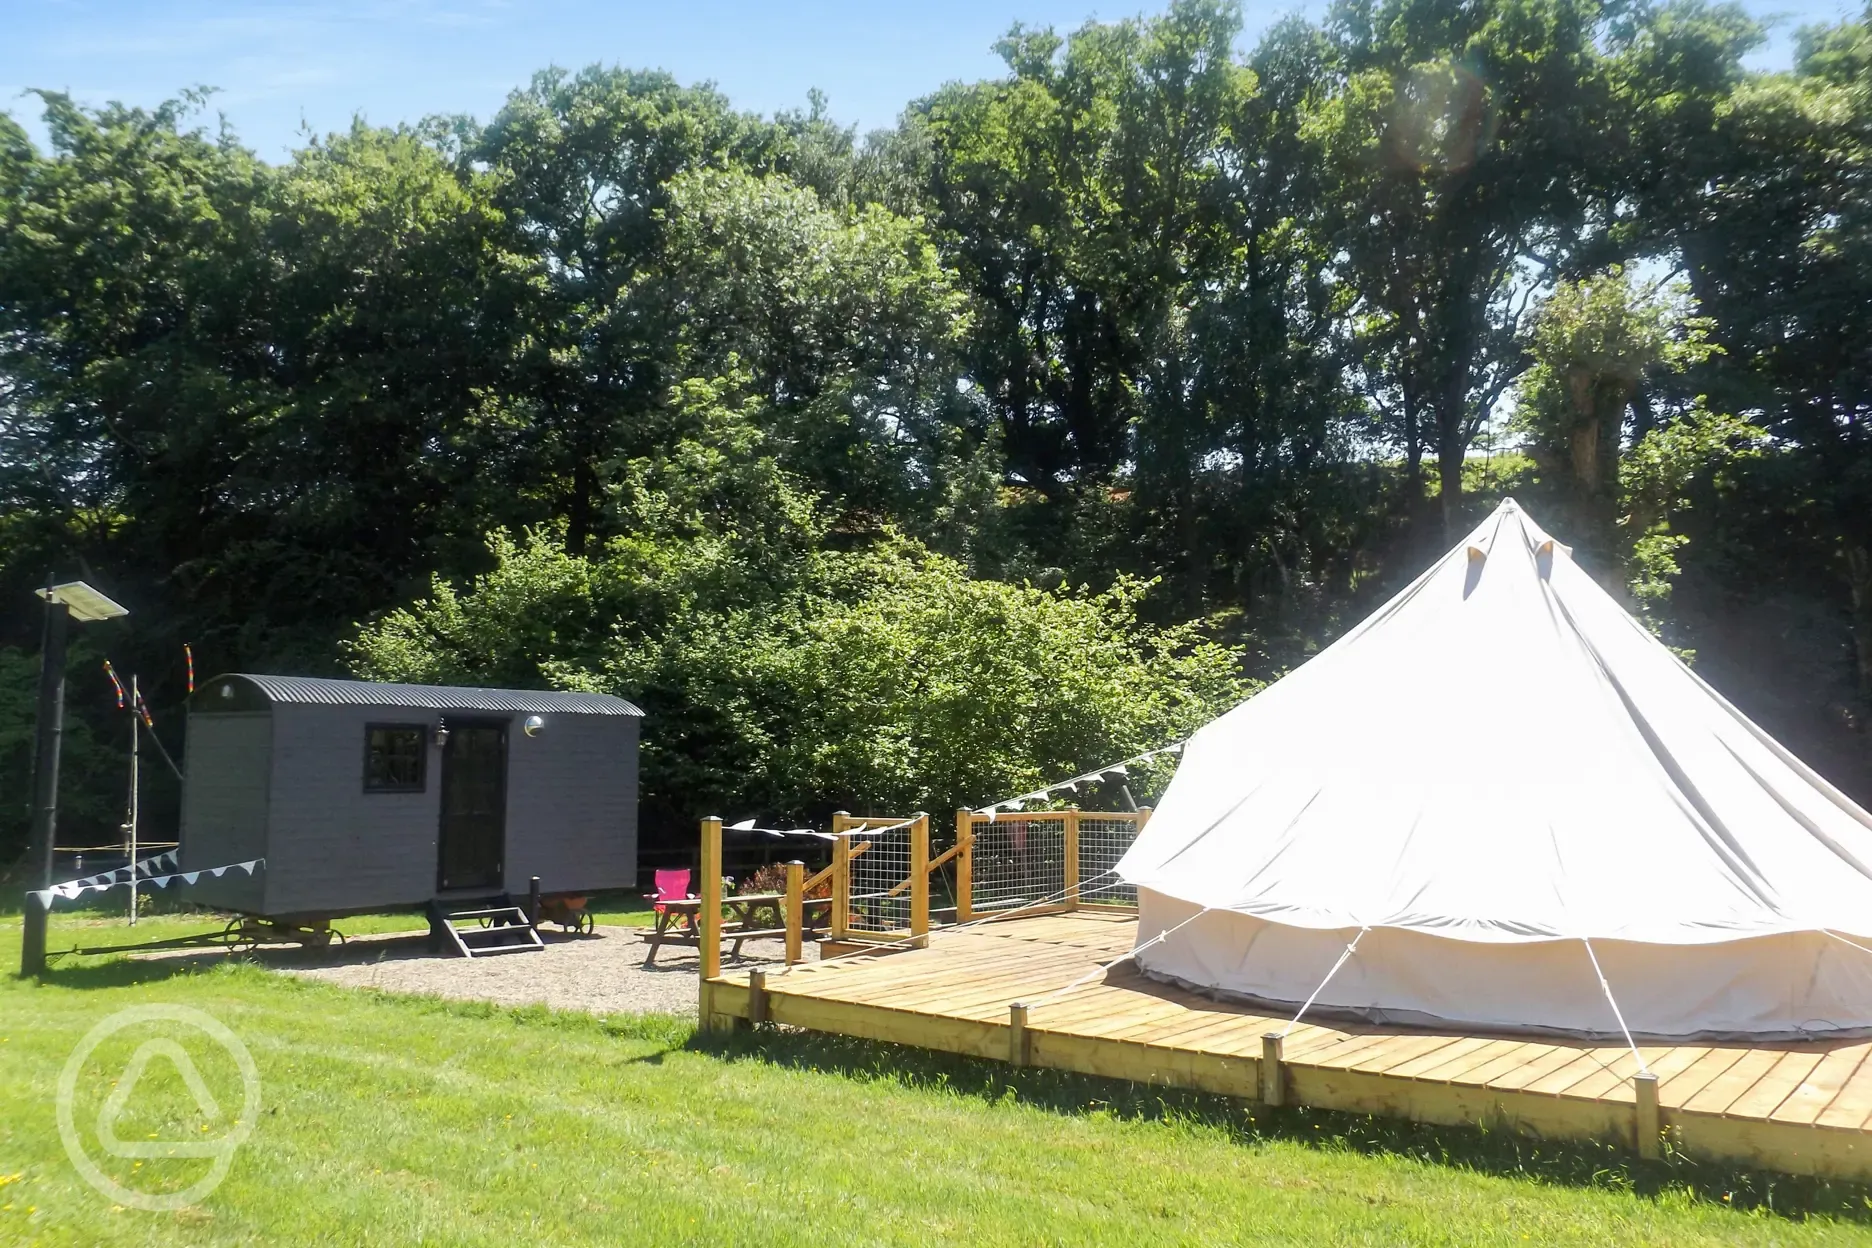 Large bell tent and shepherd's hut